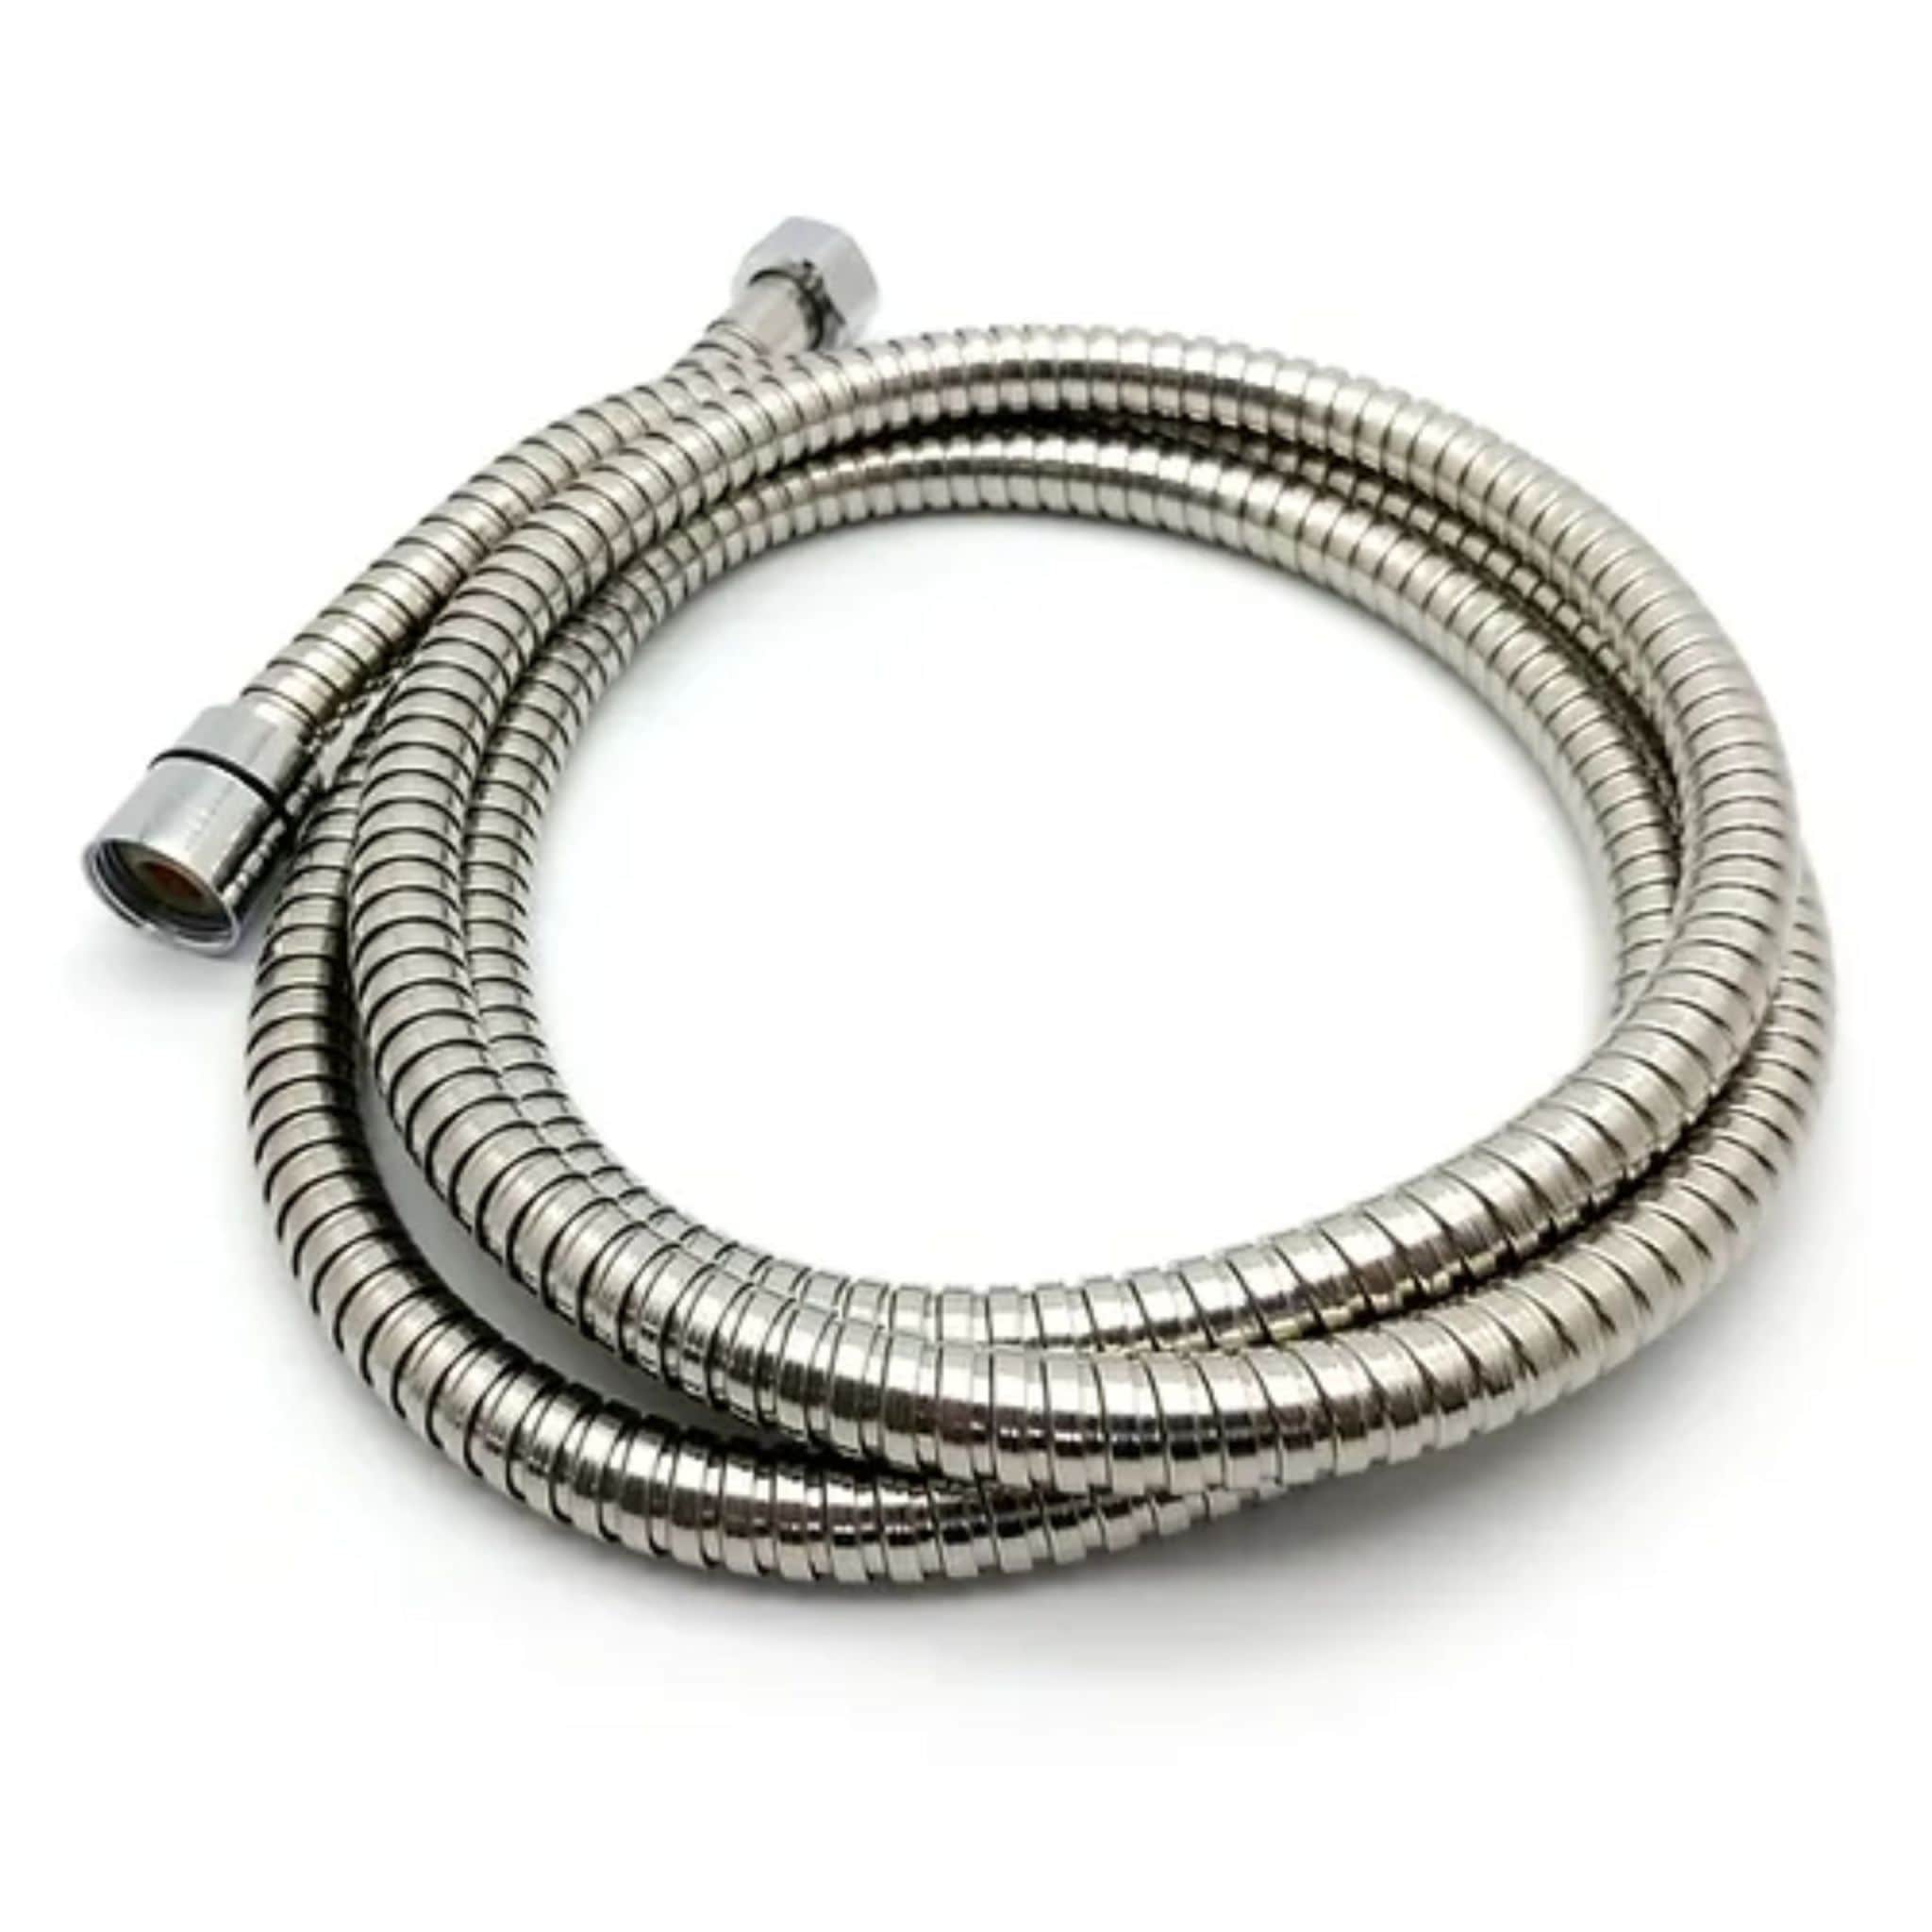 OE SmoothPour 1.2M Stainless Steel Hand Shower Flexi Pipe – Durable, Flexible, and Stylish Shower Hose Upgrade